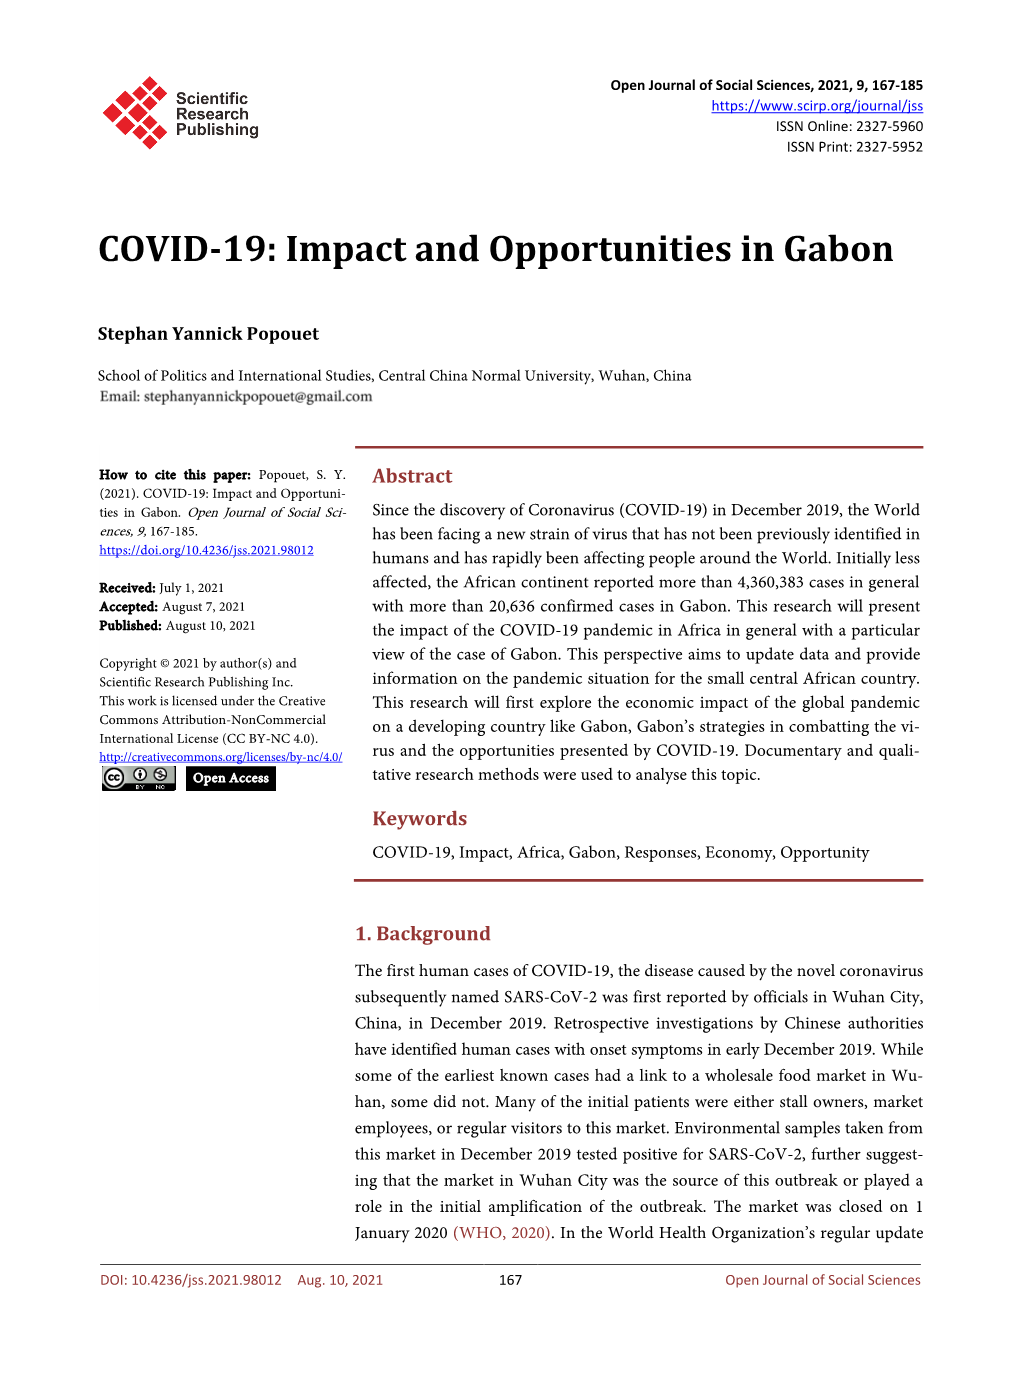 COVID-19: Impact and Opportunities in Gabon